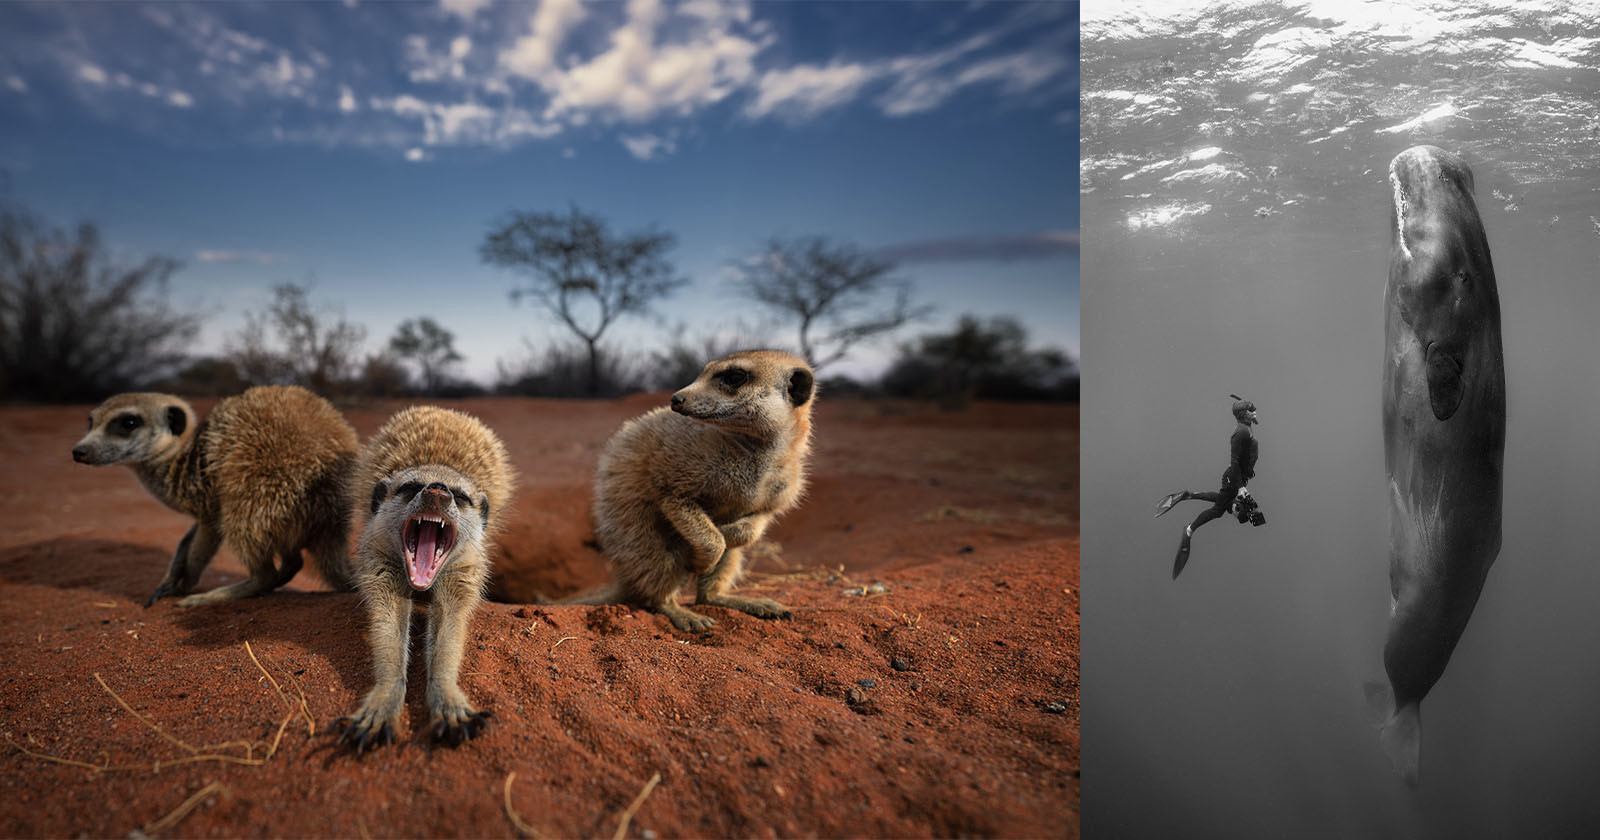 Stunning Nature Photos On Sale to Raise Money for Wildlife Protection